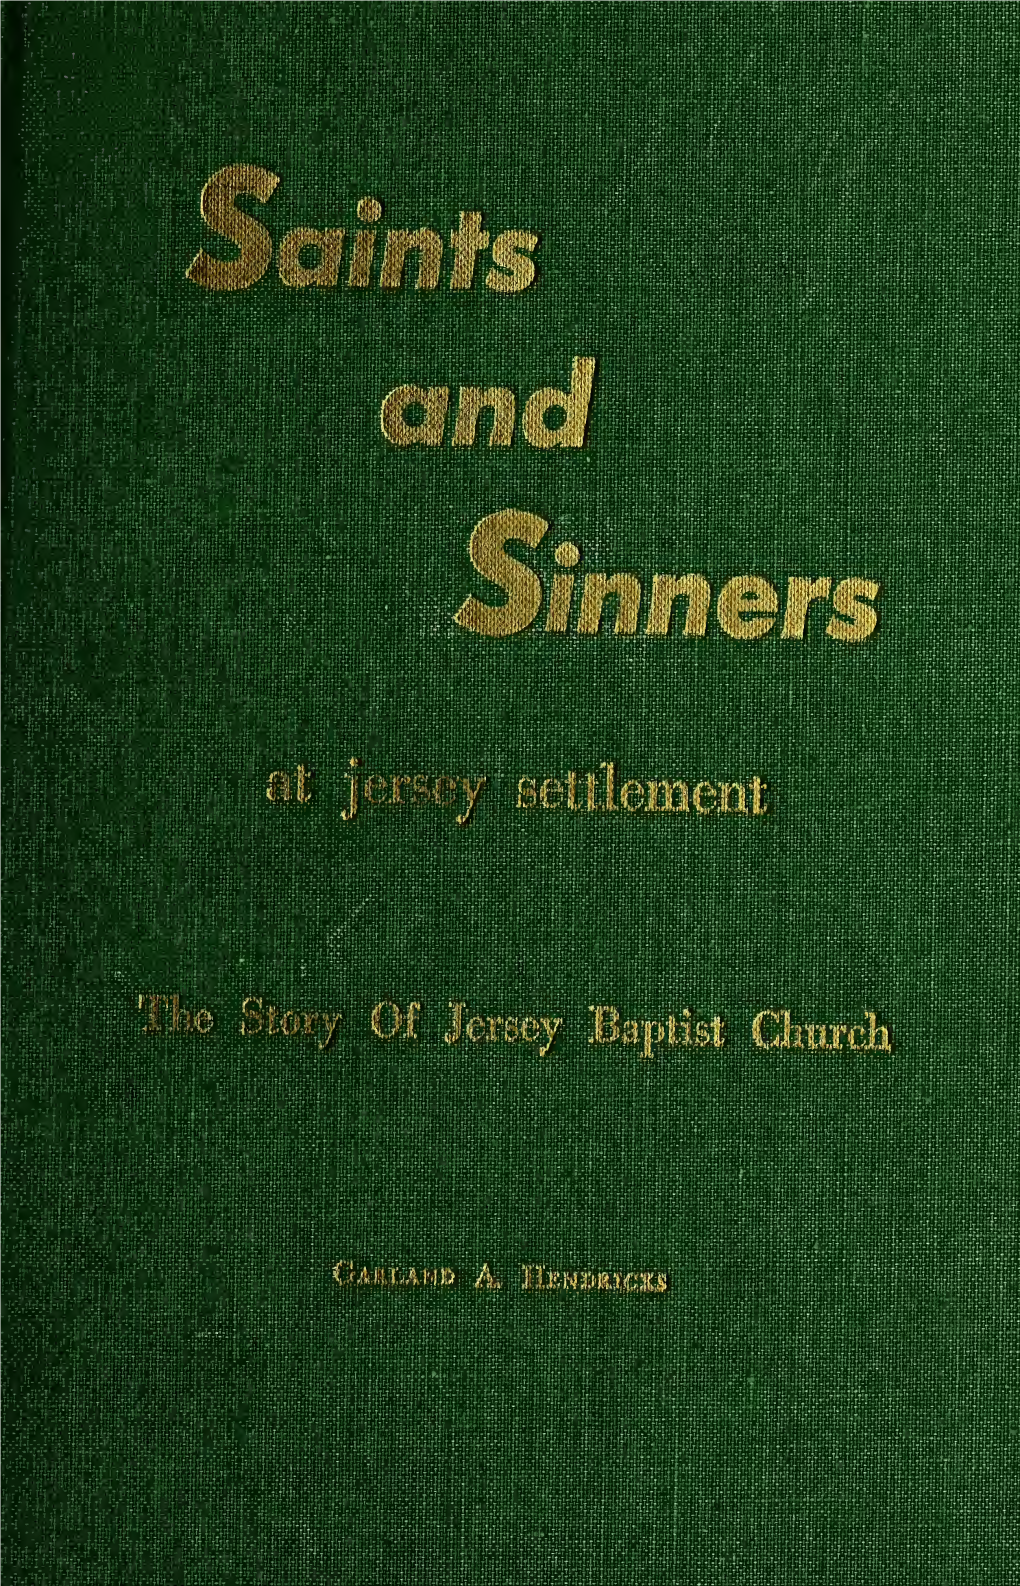 Saints and Sinners at Jersey Settlement; the Life Story of Jersey